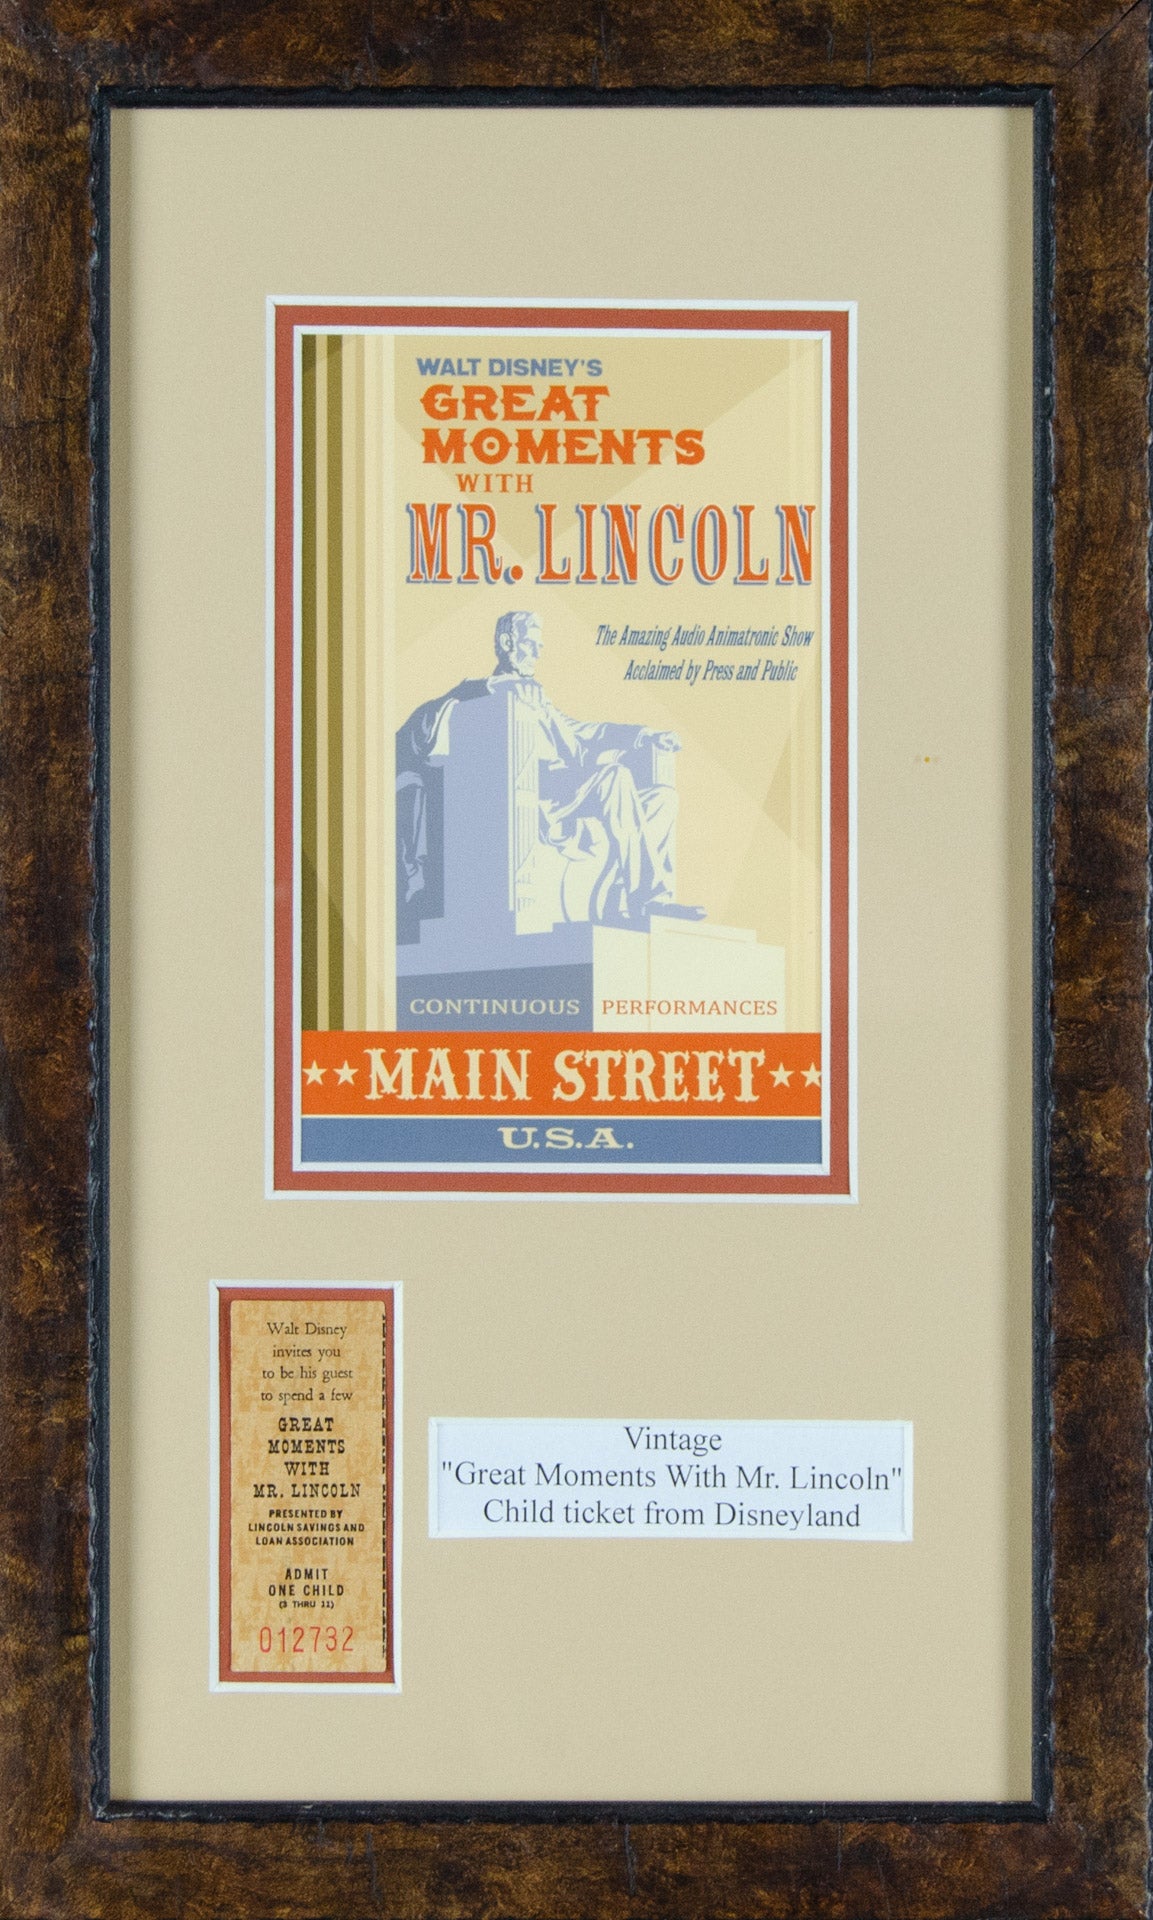 Child's Ticket for Great Moments with Mr. Lincoln